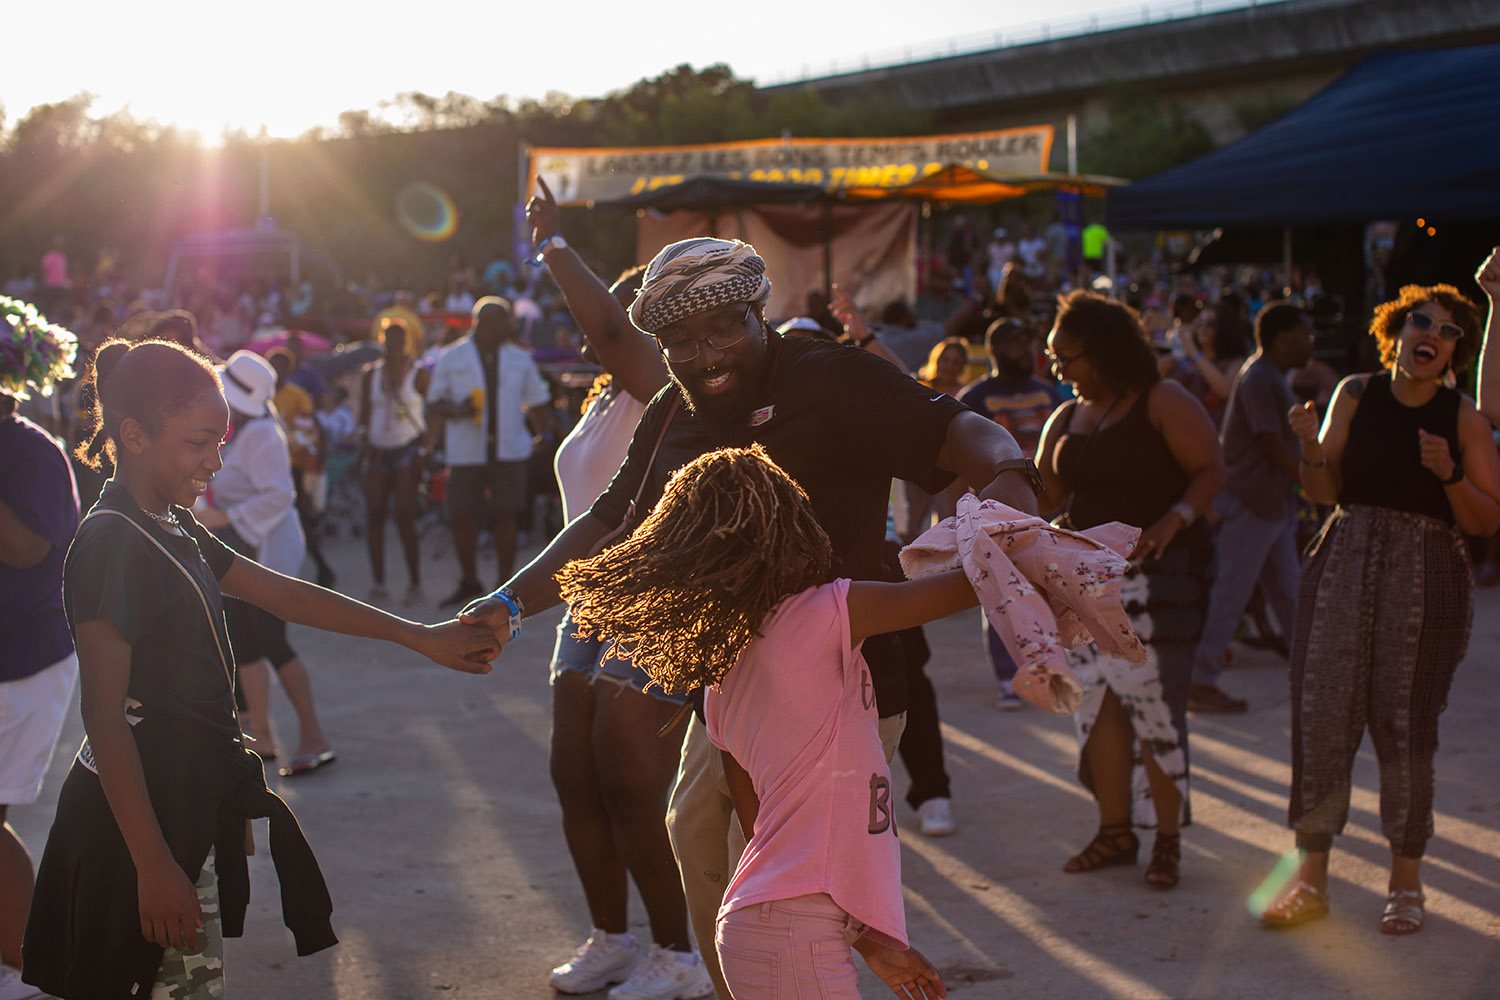 Several people danced and drank while listening to a jazz band perform during A Taste of New Orleans, the 35th edition of the Fiesta event, on Saturday evening, April 2, 2022, at Sunken Garden Theater in San Antonio, Texas. Photo by Kaylee Greenlee Beal | Heron contributor